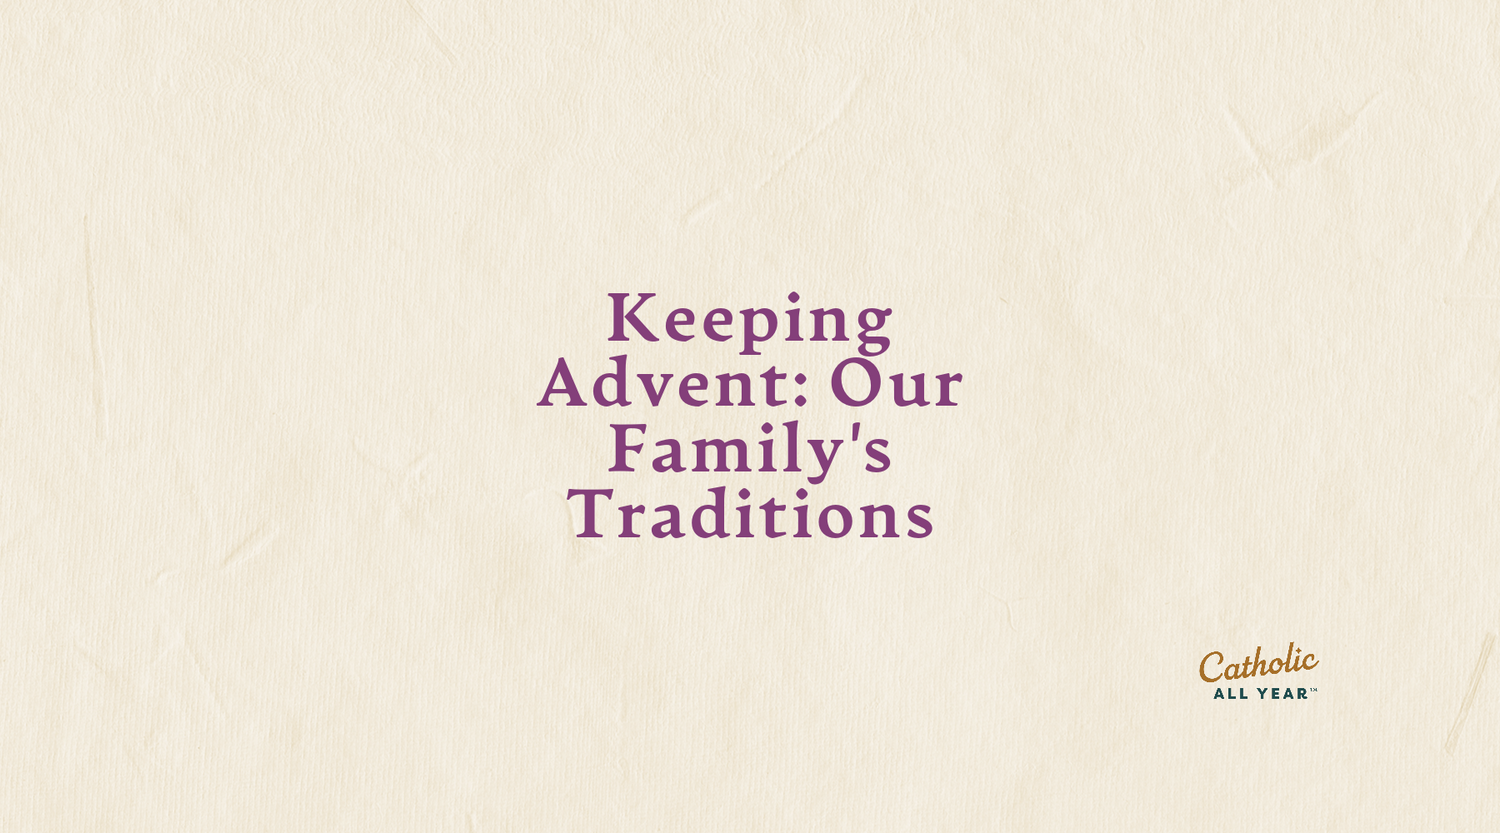 Keeping Advent: Our Family's Traditions